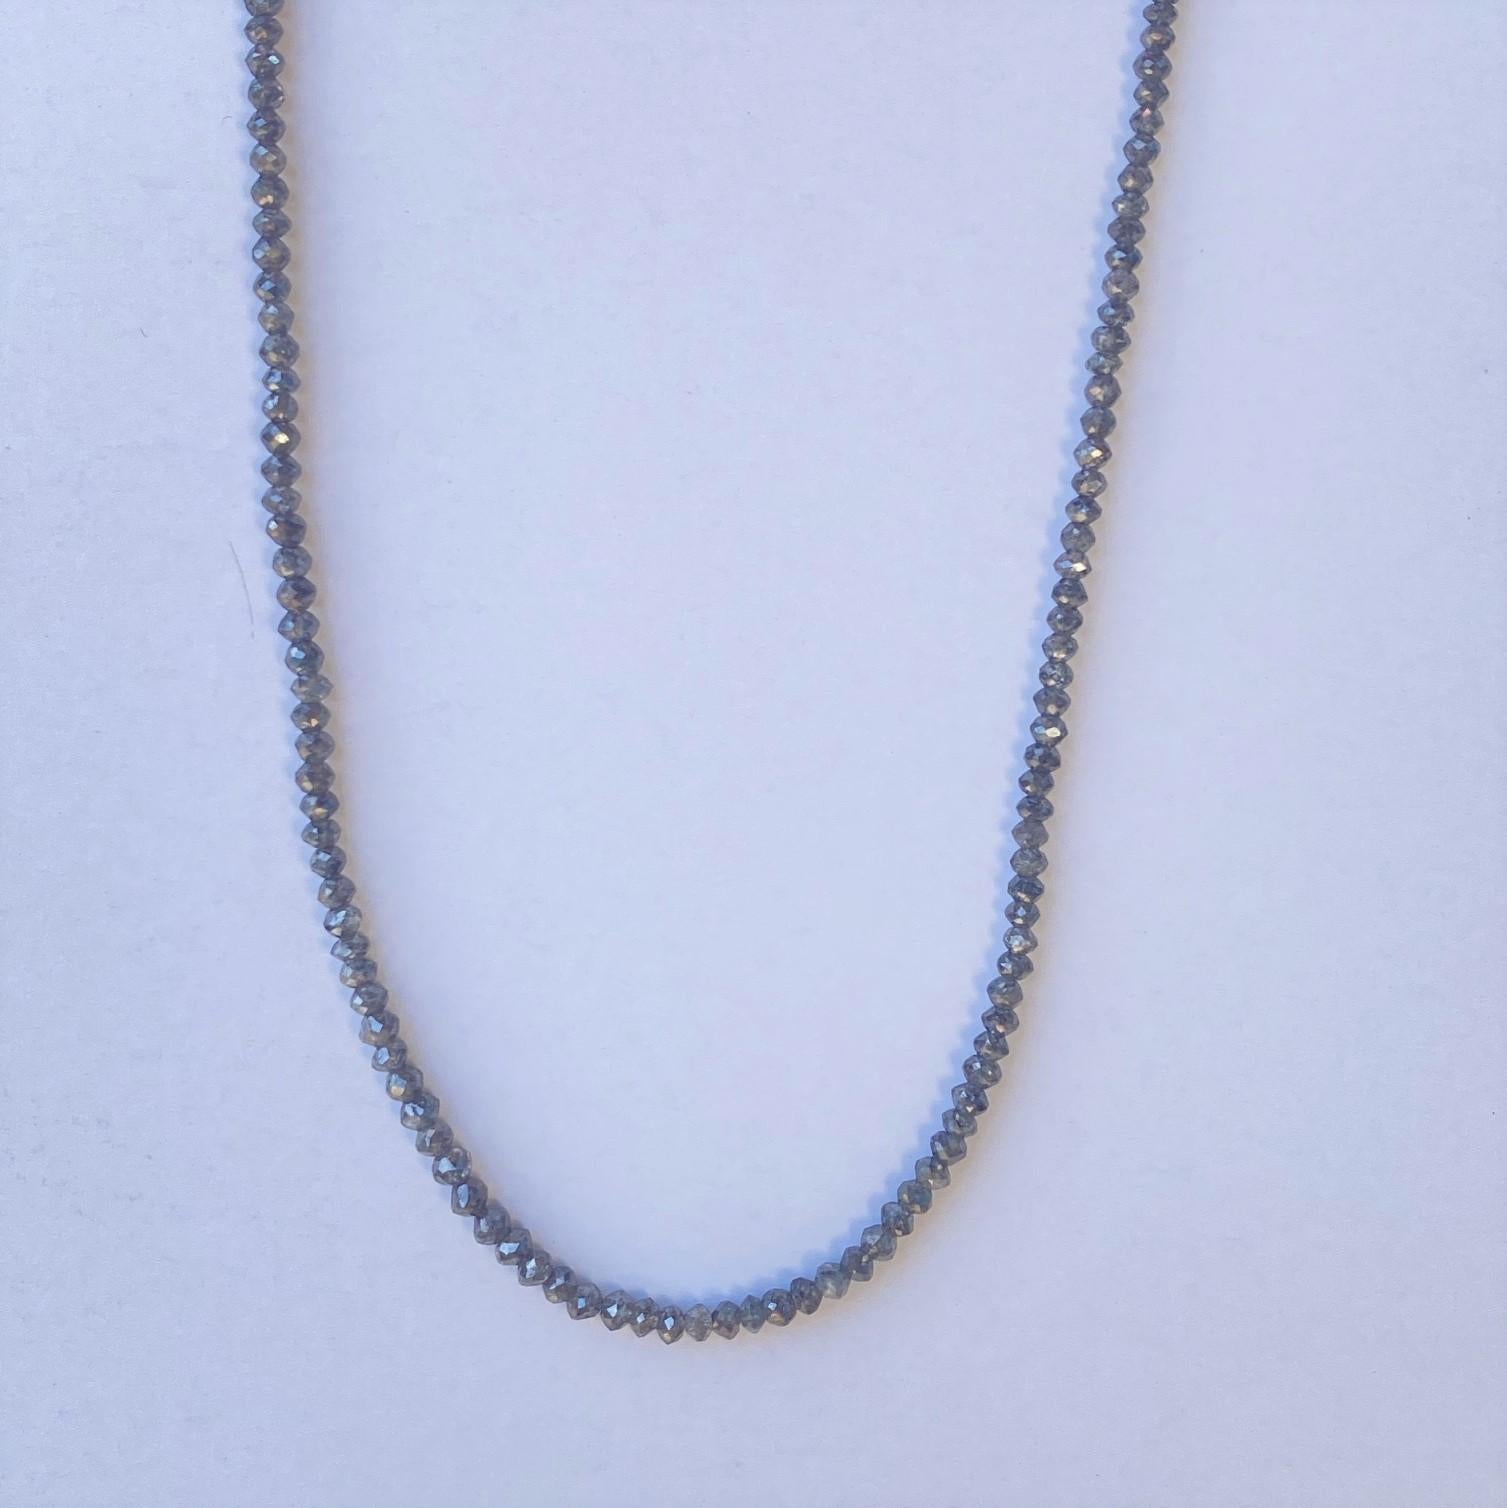 A 27.82ctw Steel Gray Faceted Rondell 17 inch diamond necklace with 14k or 18k white gold clasp parts. This necklace was made and designed by llyn strong.